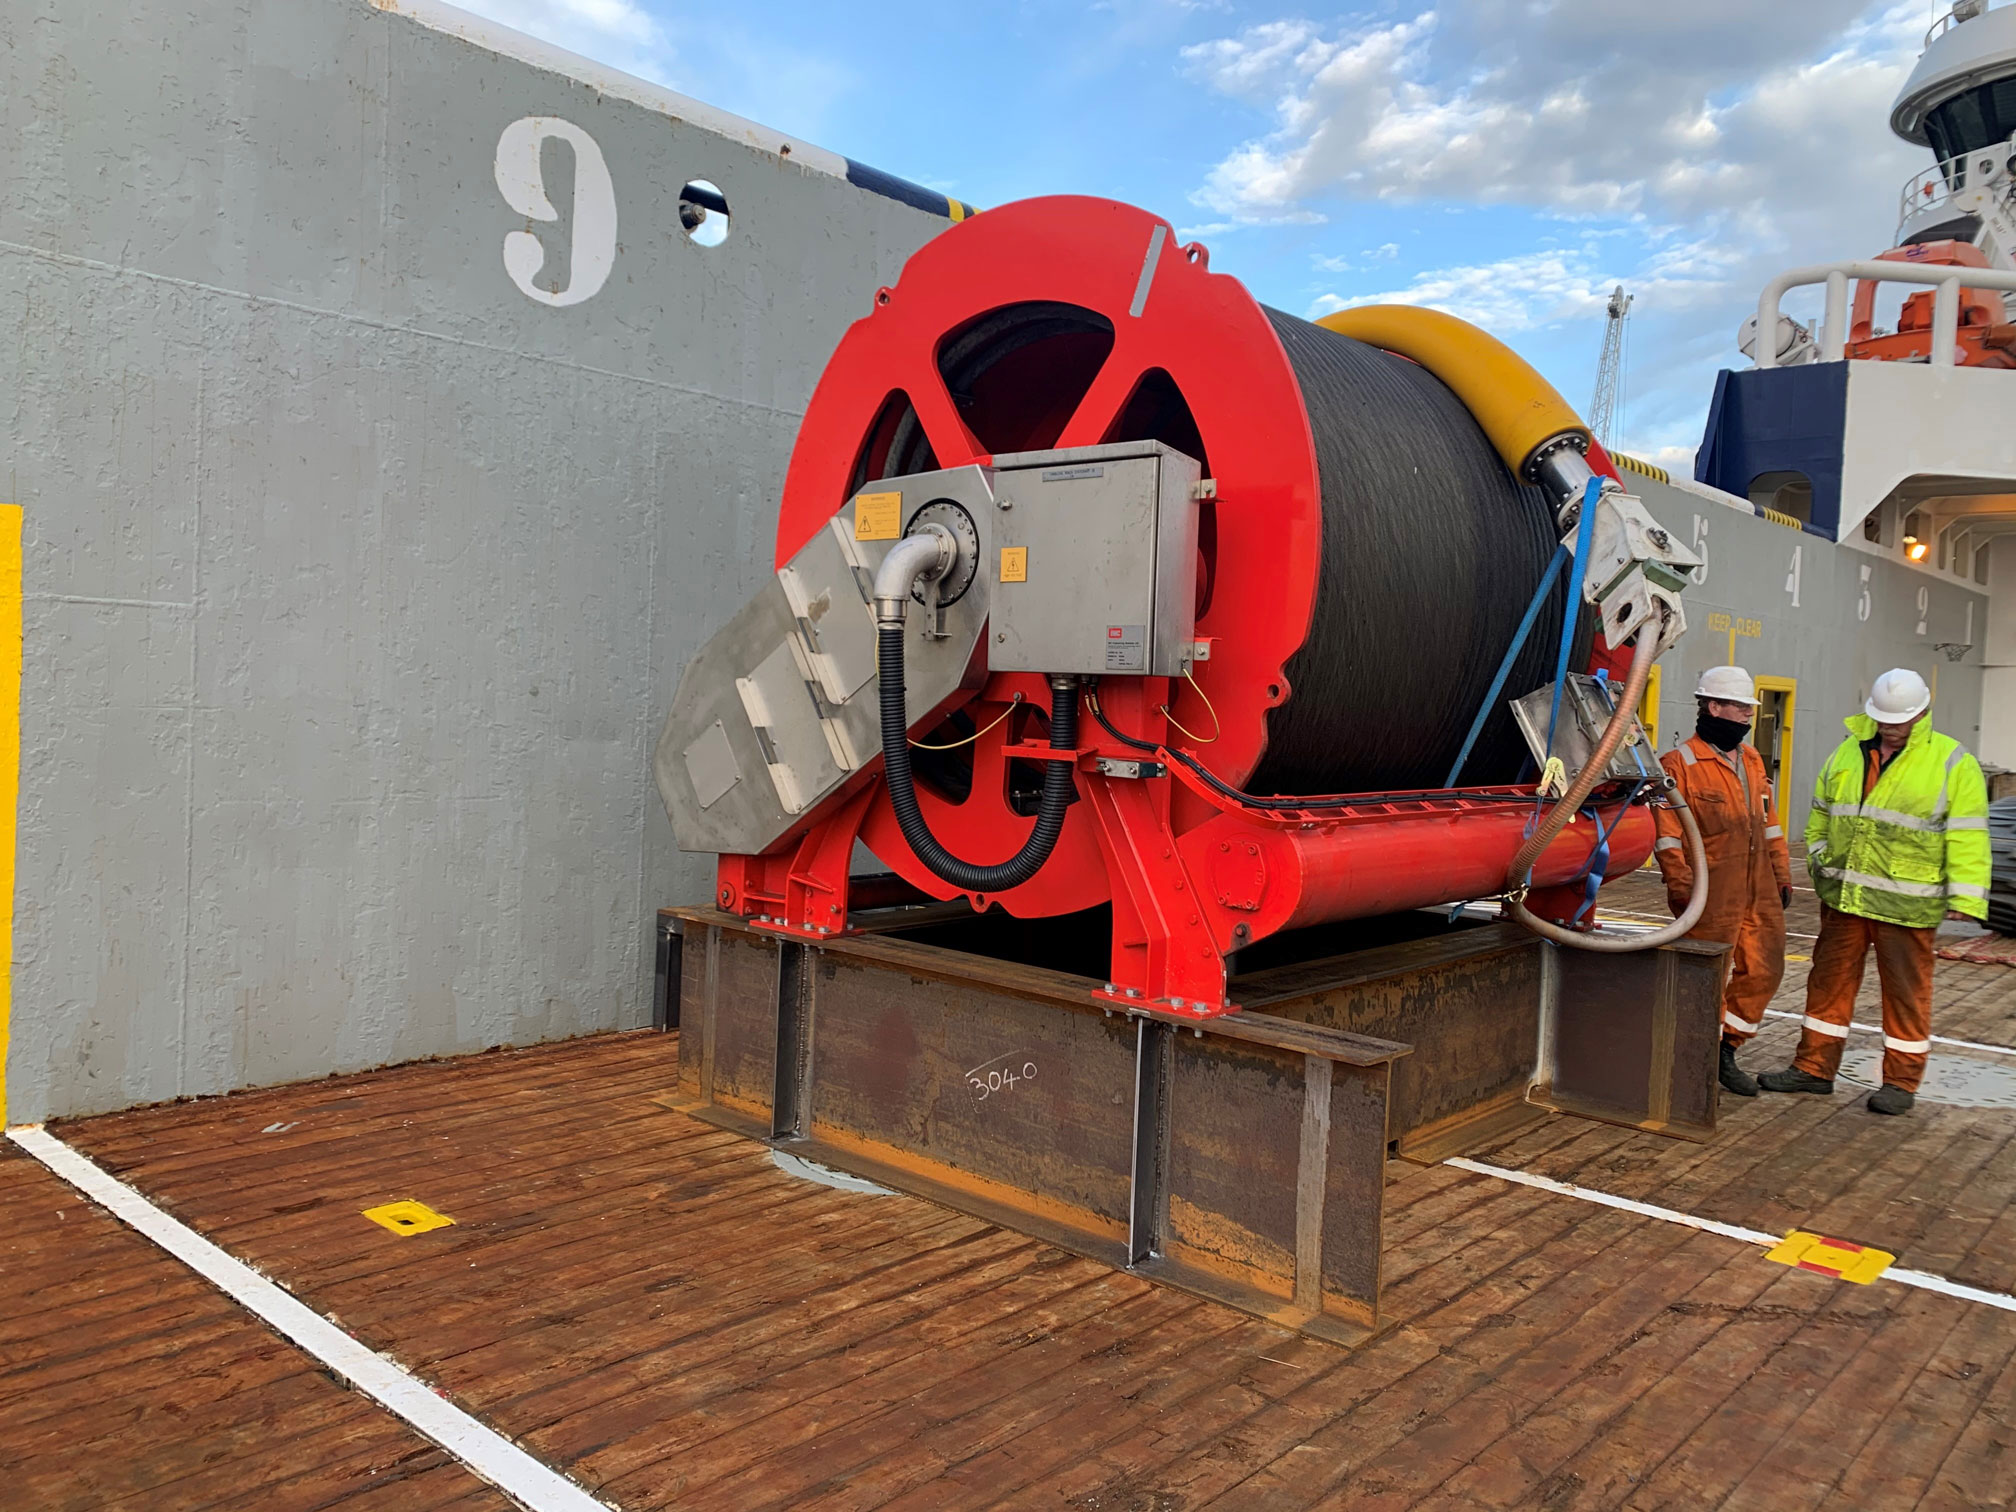 Subsea Trencher Mobilisation Aboard The Rem Cetus